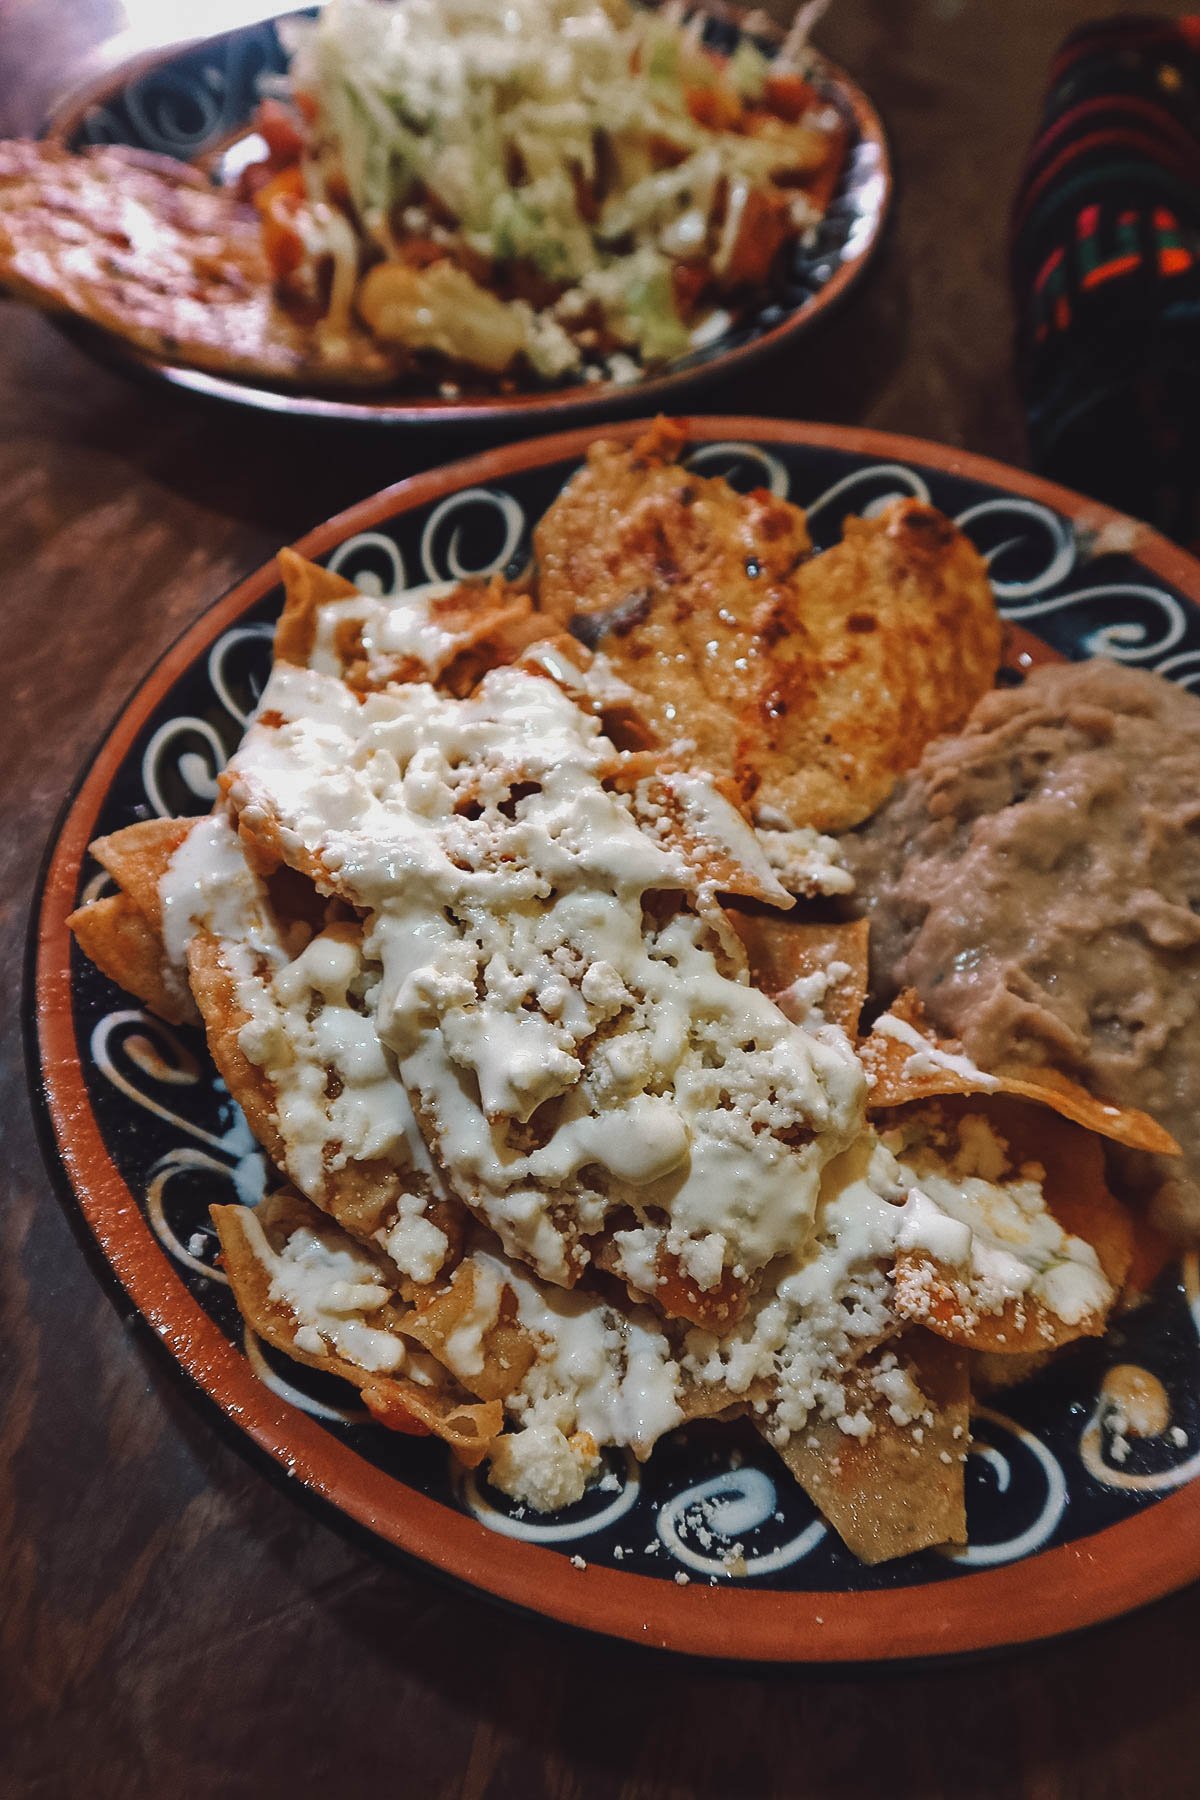 Chilaquiles at a restaurant in Guanajuato